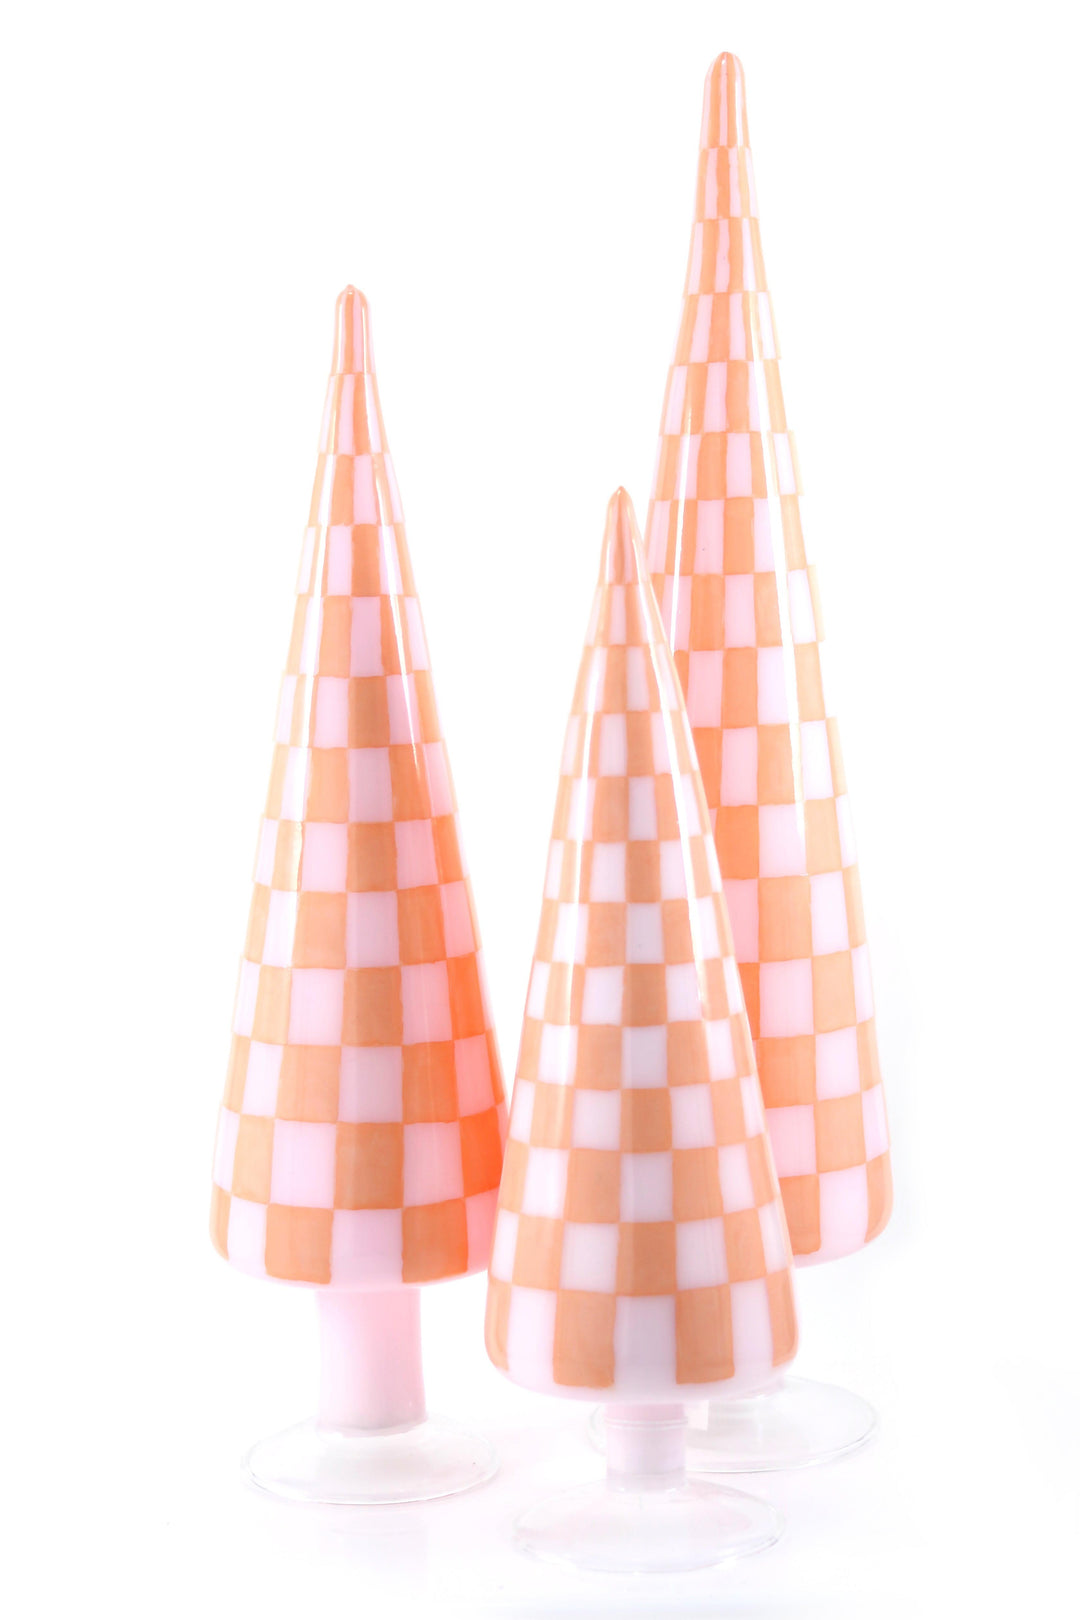 CHECKERED TREES-CORAL-SET/3 - Design for the PPL